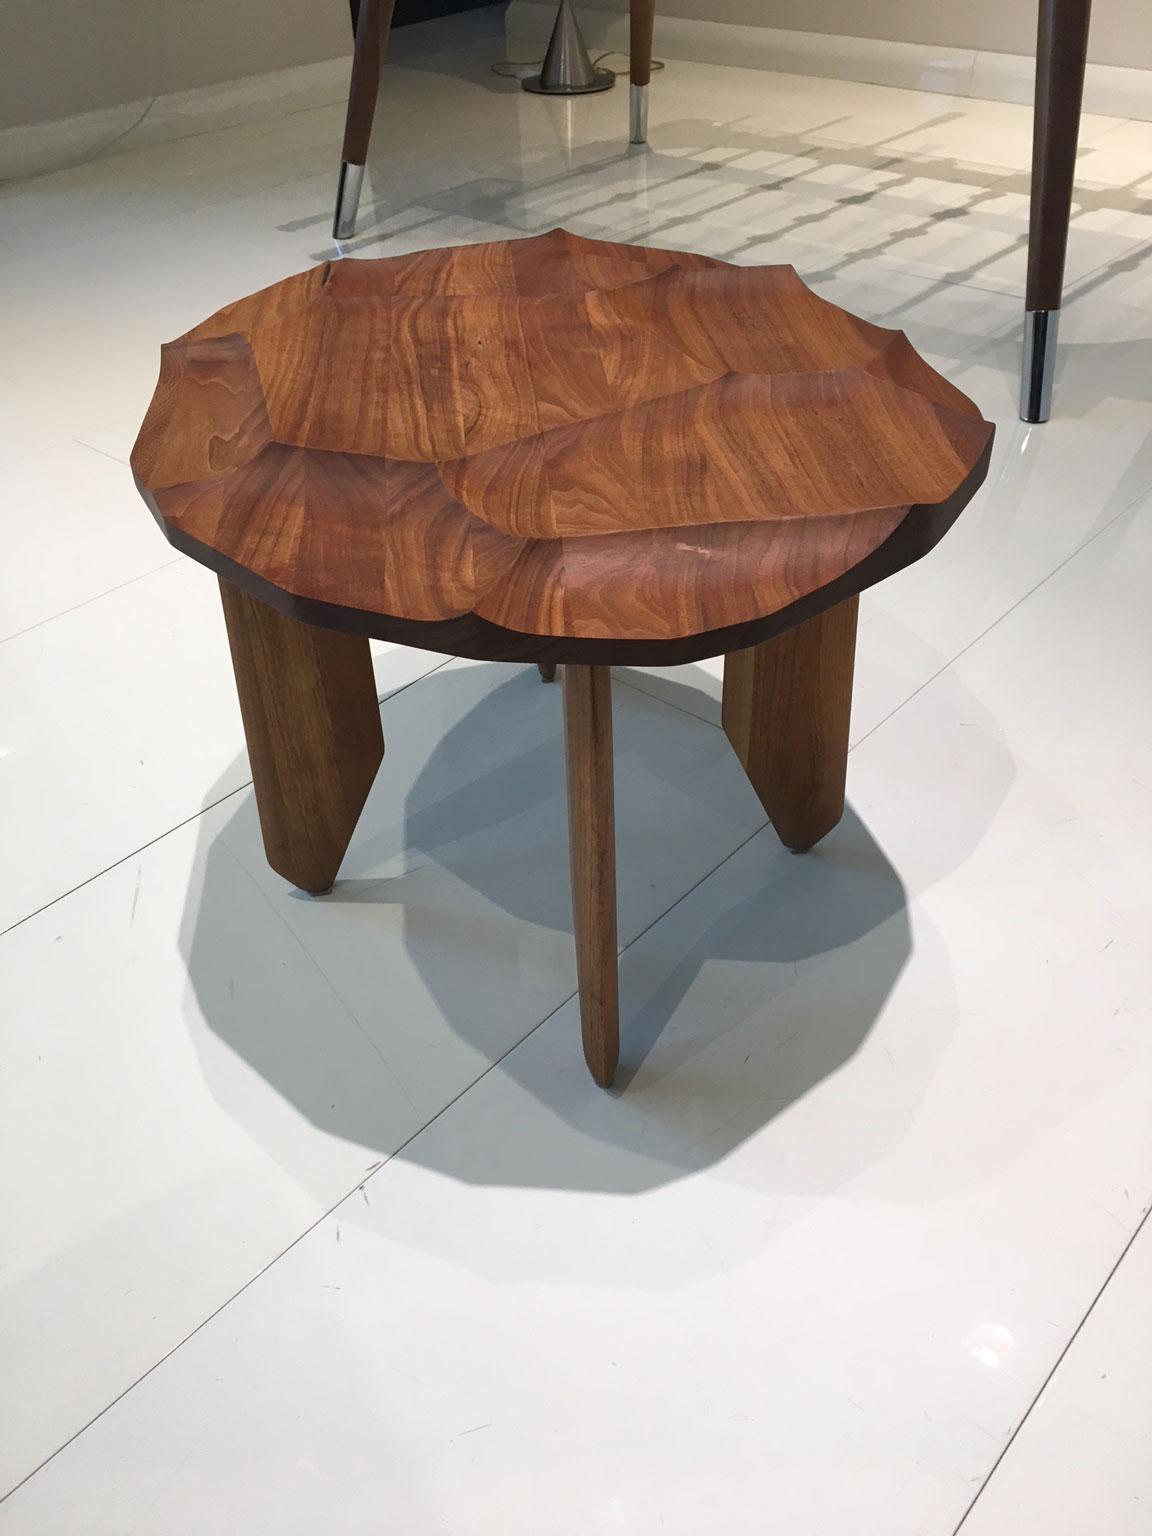 TEAM 7 - Your solid wood furniture manufacturer from Austria.
The starting point for sensible use of resources is a sustainably managed forest, which regrows continuously under the power of the sun. With the greatest care and attention to detail,